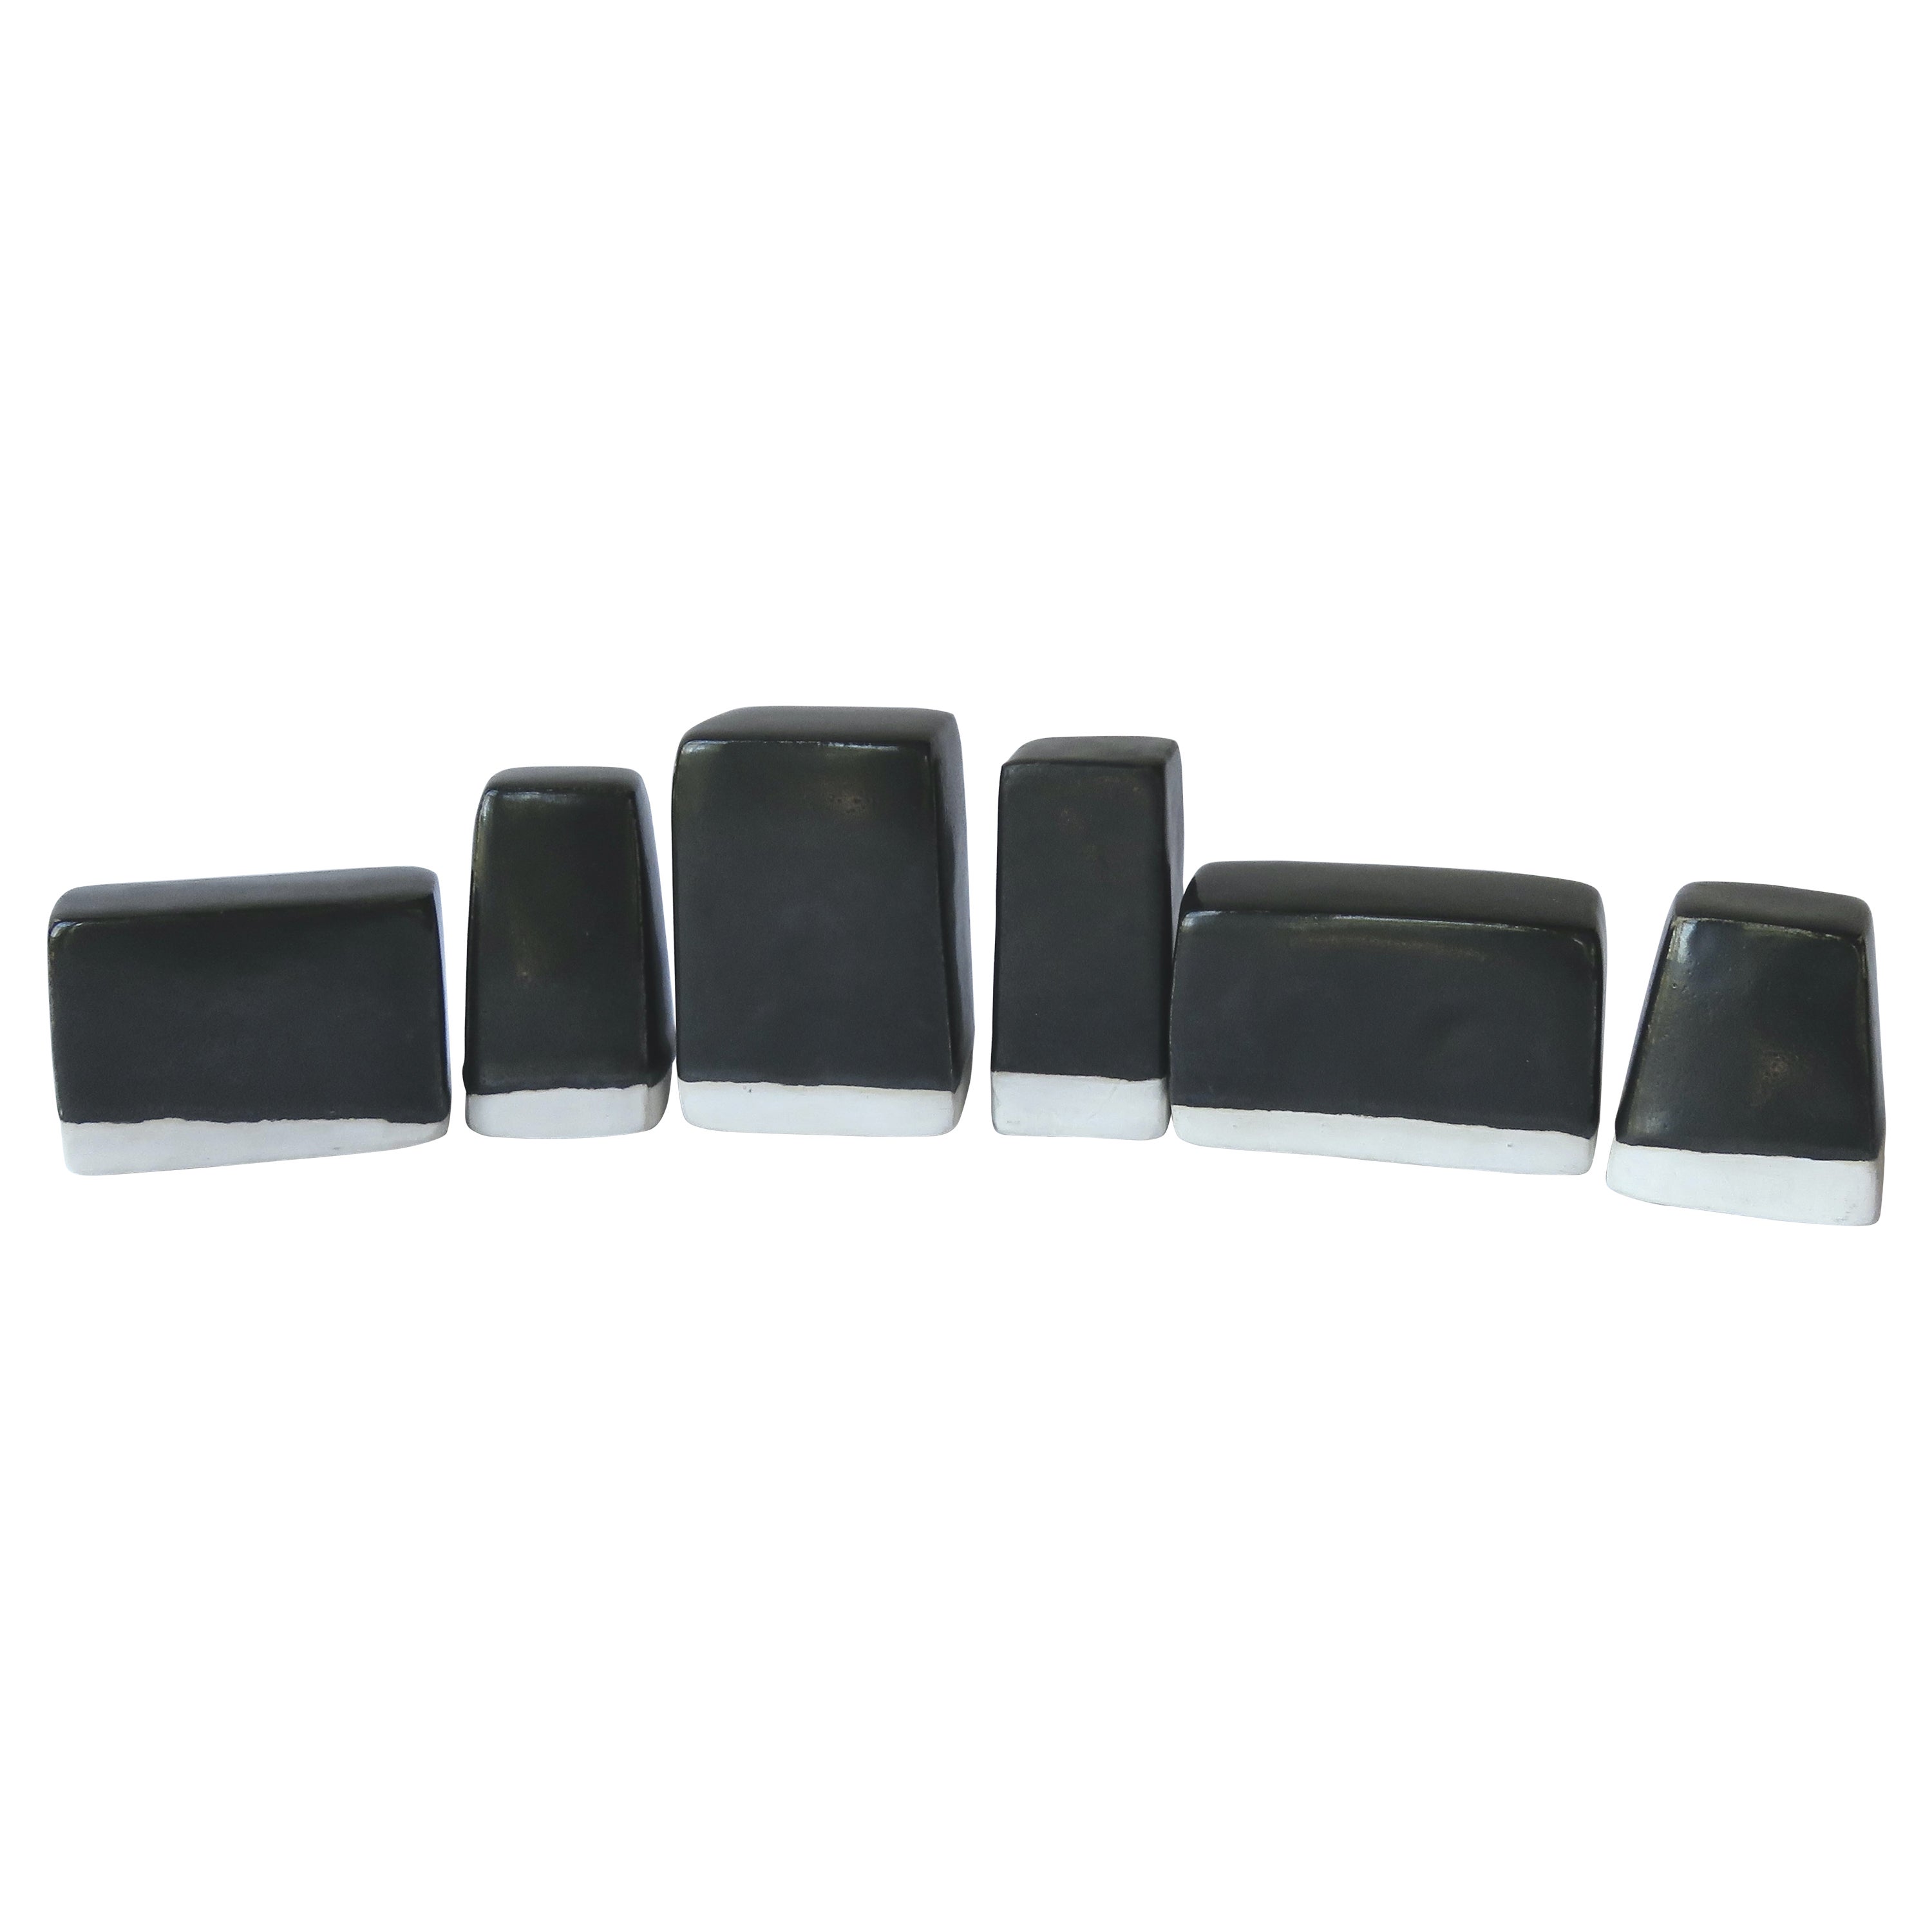 Six '6' Glazed Black and White Stackable, Moveable Blocks